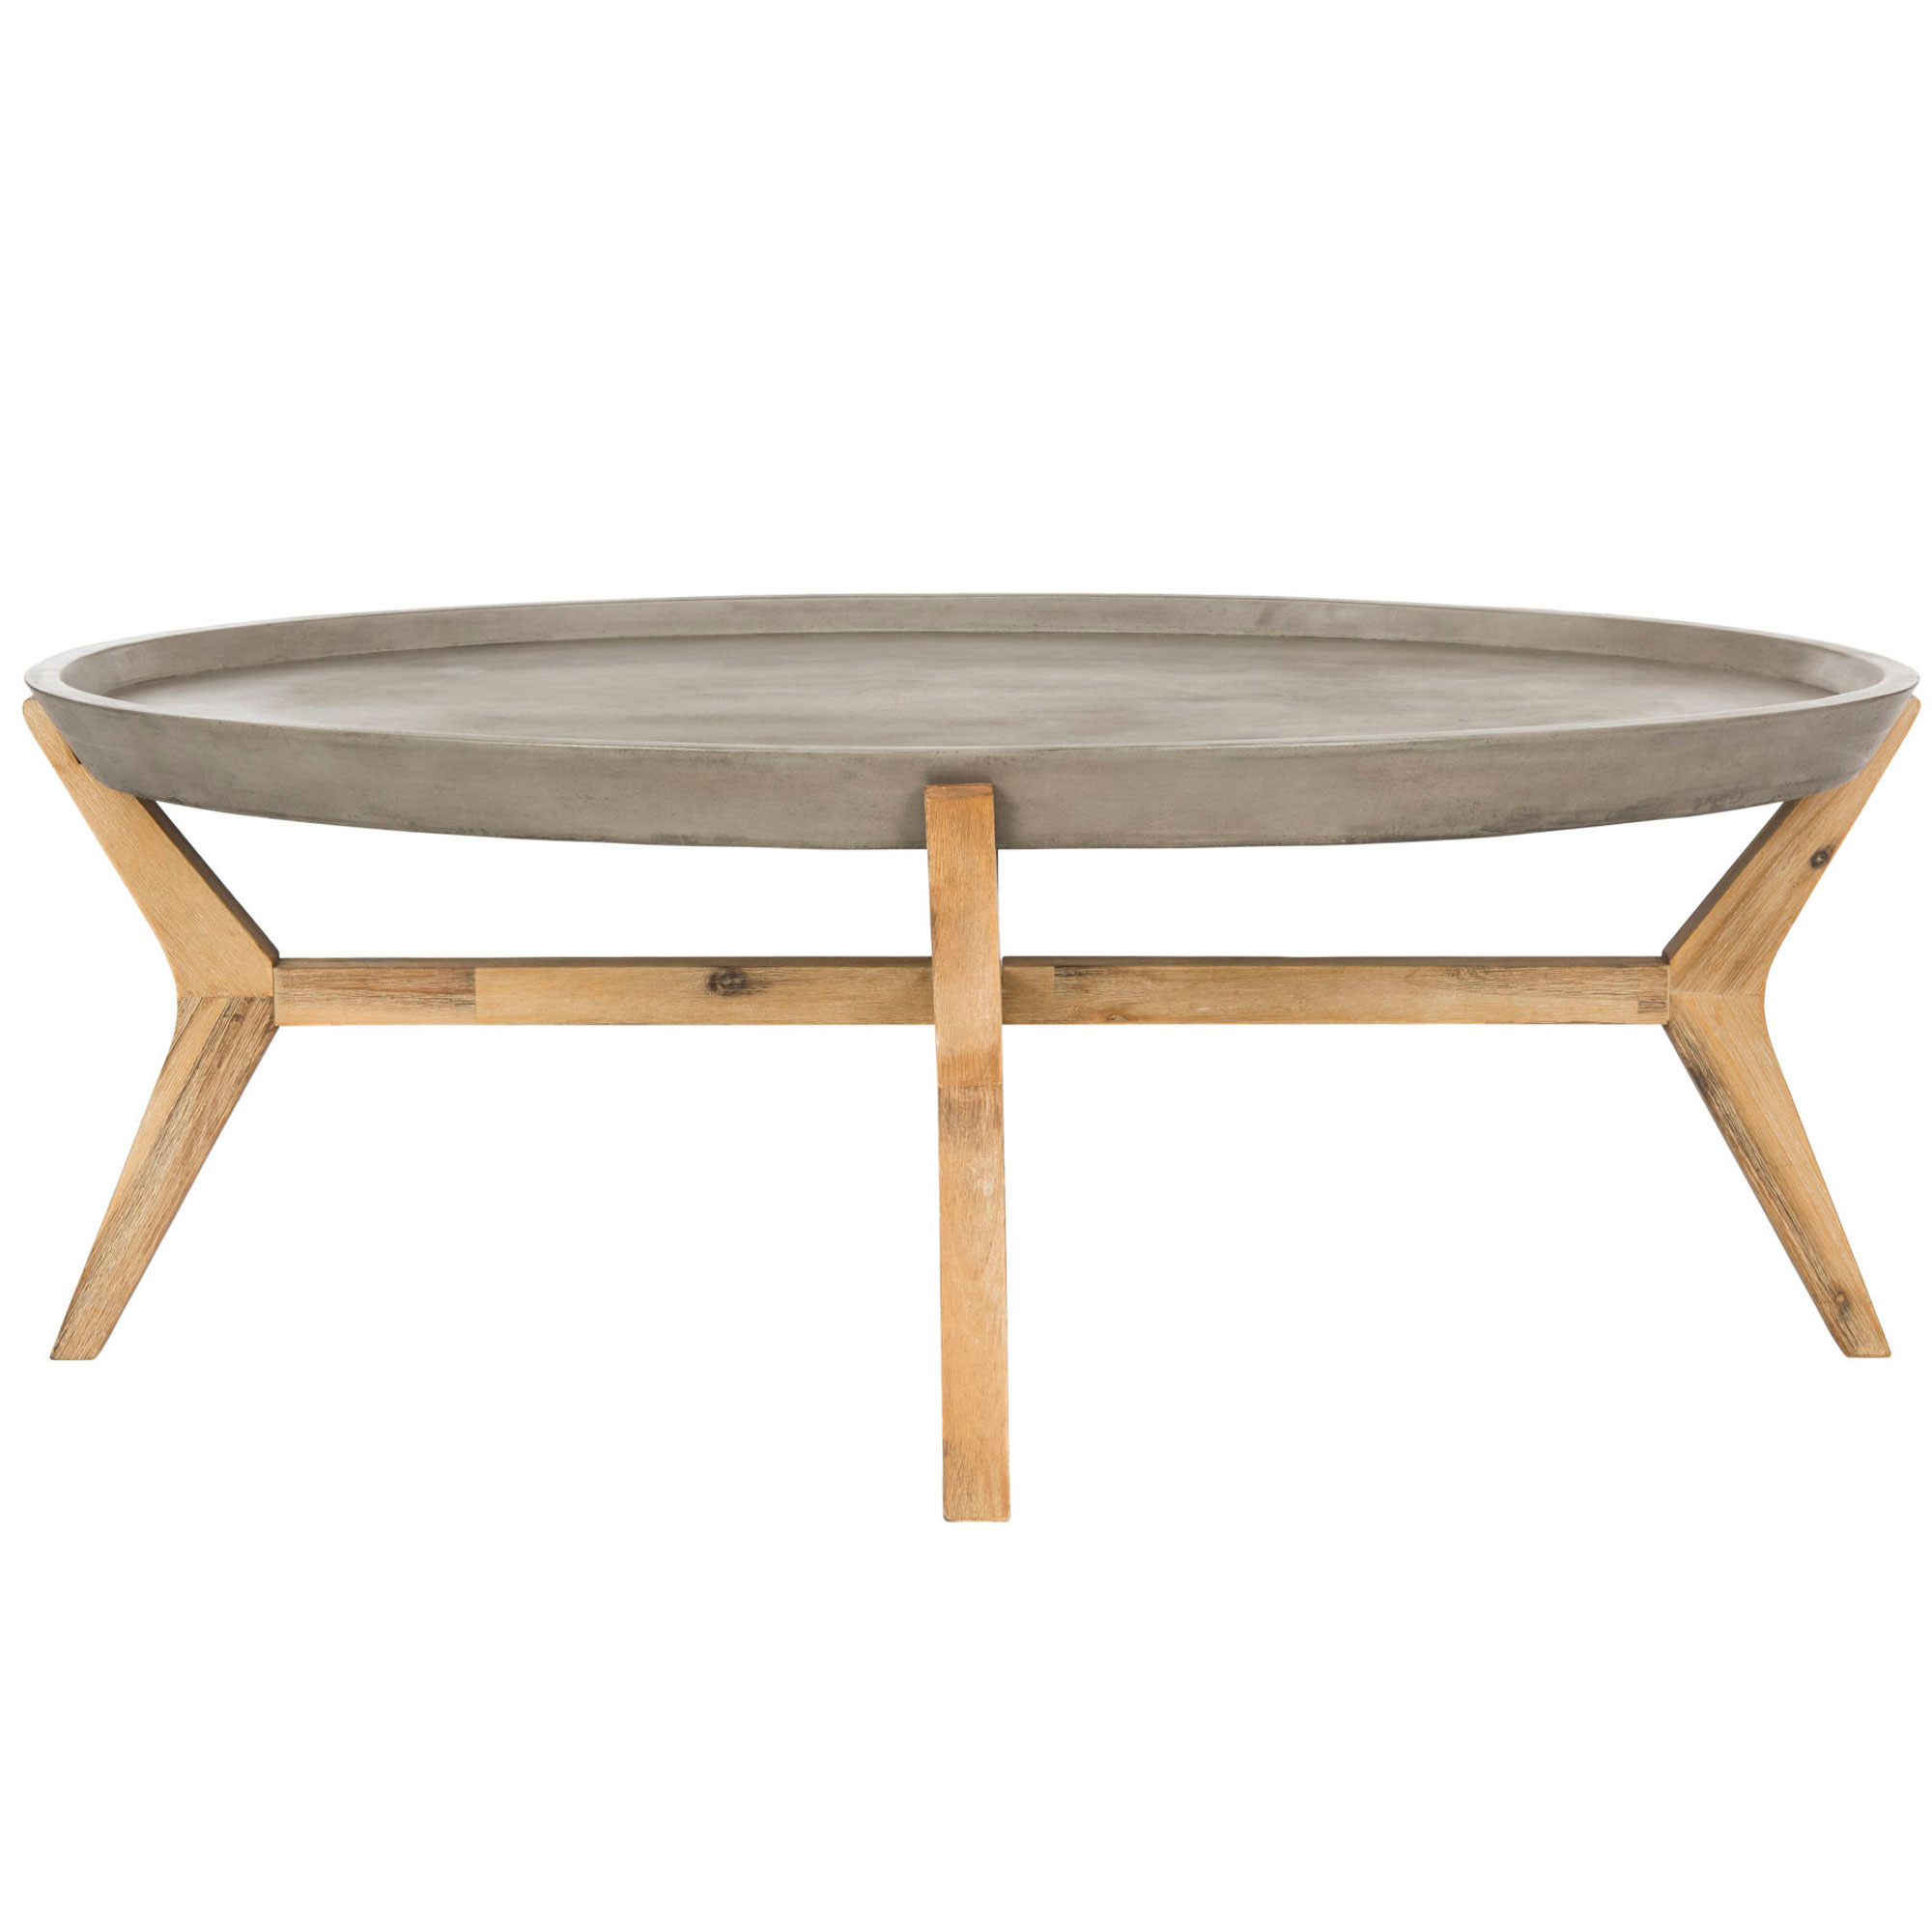 Hadwin Indoor/Outdoor Modern Concrete Oval 31.5-Inch Dia Coffee Table